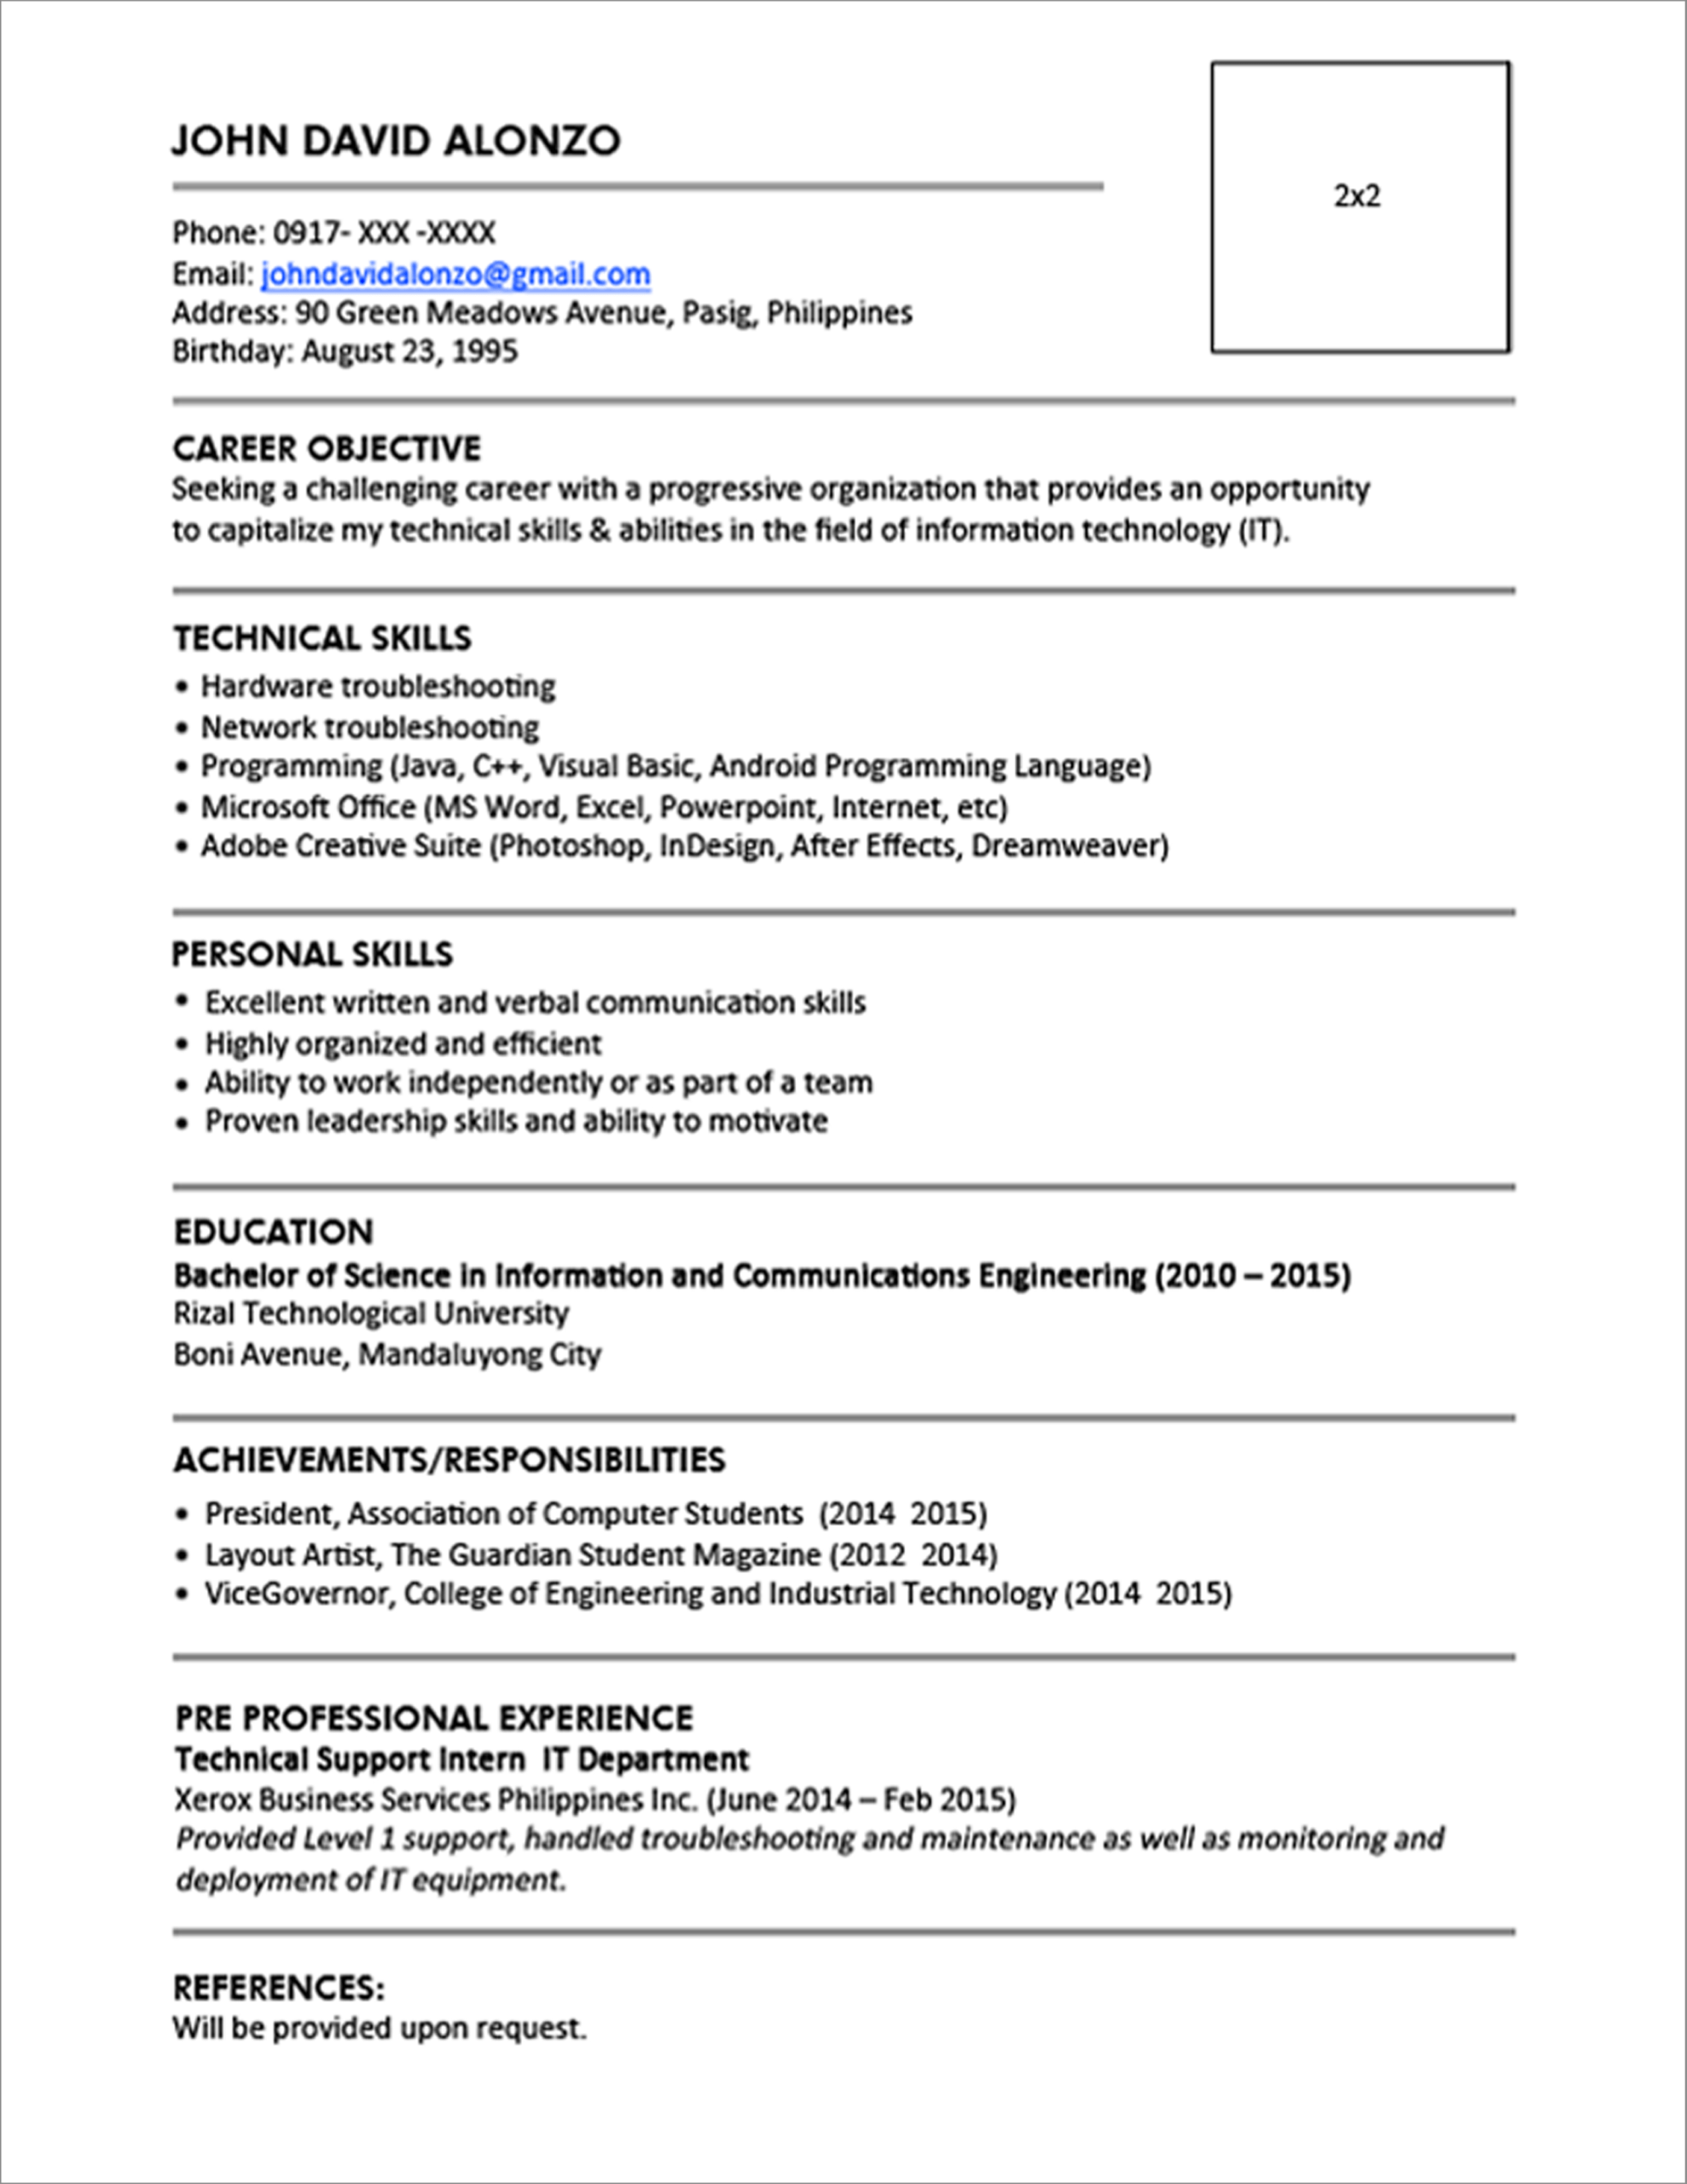 Resume Templates You Can Download | Jobstreet Philippines Regarding Free Basic Resume Templates Microsoft Word